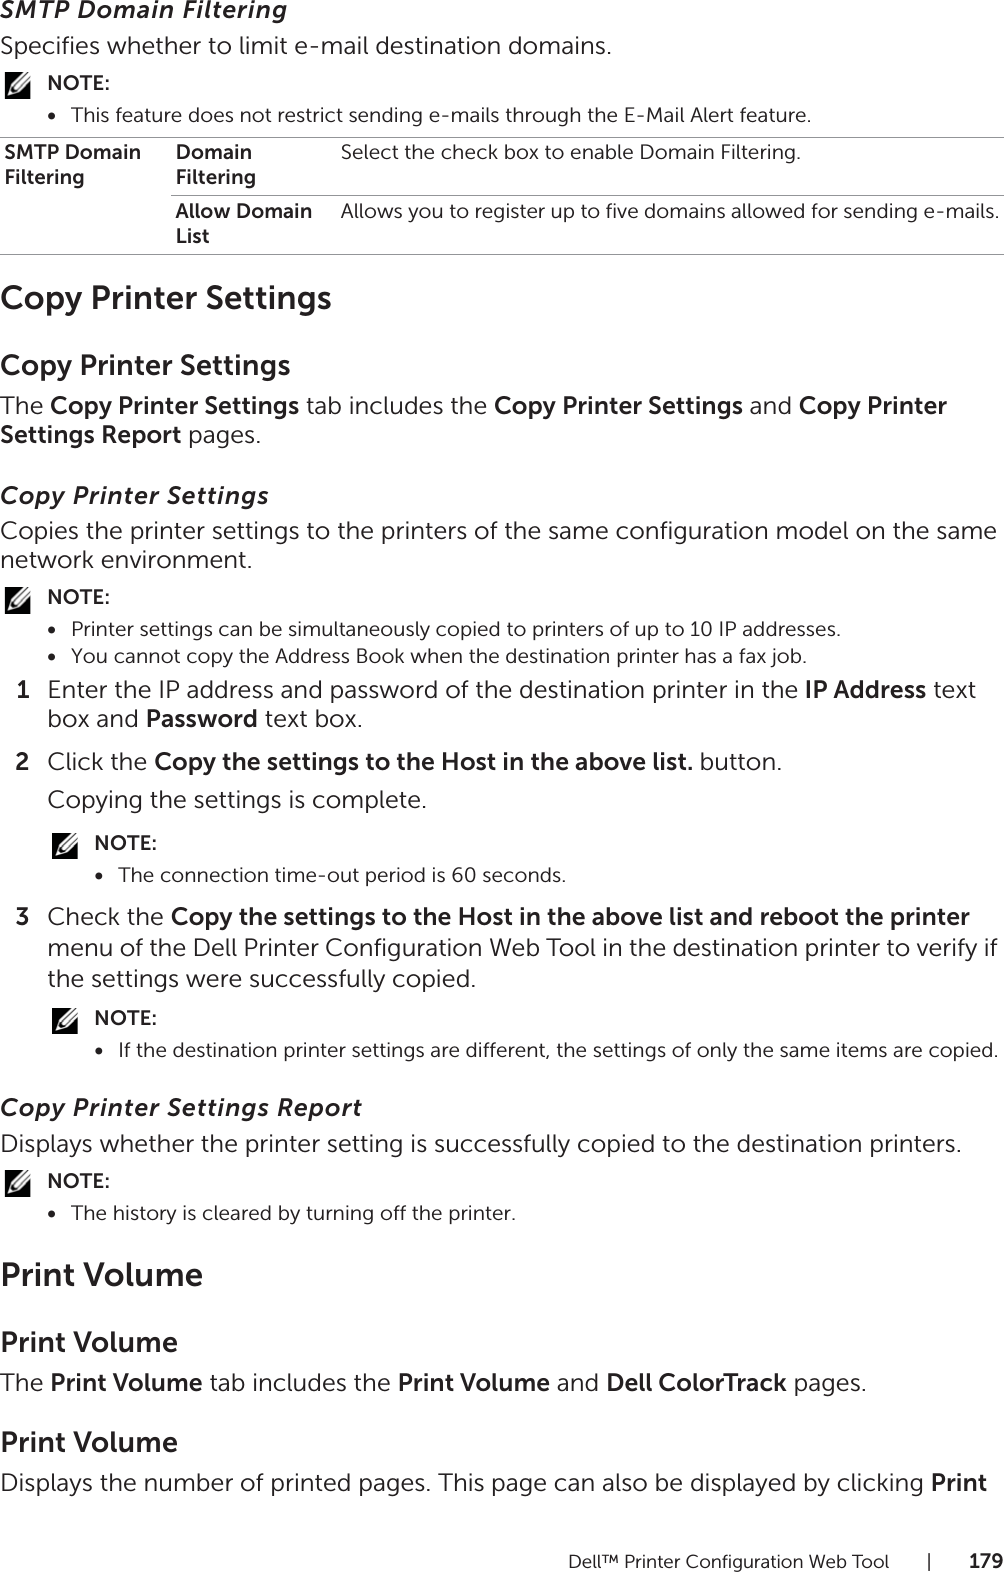 Dell™ Printer Configuration Web Tool |179SMTP Domain FilteringSpecifies whether to limit e-mail destination domains.NOTE:•This feature does not restrict sending e-mails through the E-Mail Alert feature.Copy Printer SettingsCopy Printer SettingsThe Copy Printer Settings tab includes the Copy Printer Settings and Copy Printer Settings Report pages.Copy Printer SettingsCopies the printer settings to the printers of the same configuration model on the same network environment.NOTE:•Printer settings can be simultaneously copied to printers of up to 10 IP addresses.•You cannot copy the Address Book when the destination printer has a fax job.1Enter the IP address and password of the destination printer in the IP Address text box and Password text box.2Click the Copy the settings to the Host in the above list. button.Copying the settings is complete.NOTE:•The connection time-out period is 60 seconds.3Check the Copy the settings to the Host in the above list and reboot the printer menu of the Dell Printer Configuration Web Tool in the destination printer to verify if the settings were successfully copied.NOTE:•If the destination printer settings are different, the settings of only the same items are copied.Copy Printer Settings ReportDisplays whether the printer setting is successfully copied to the destination printers.NOTE:•The history is cleared by turning off the printer.Print VolumePrint VolumeThe Print Volume tab includes the Print Volume and Dell ColorTrack pages.Print VolumeDisplays the number of printed pages. This page can also be displayed by clicking Print SMTP Domain FilteringDomain FilteringSelect the check box to enable Domain Filtering.Allow Domain ListAllows you to register up to five domains allowed for sending e-mails.